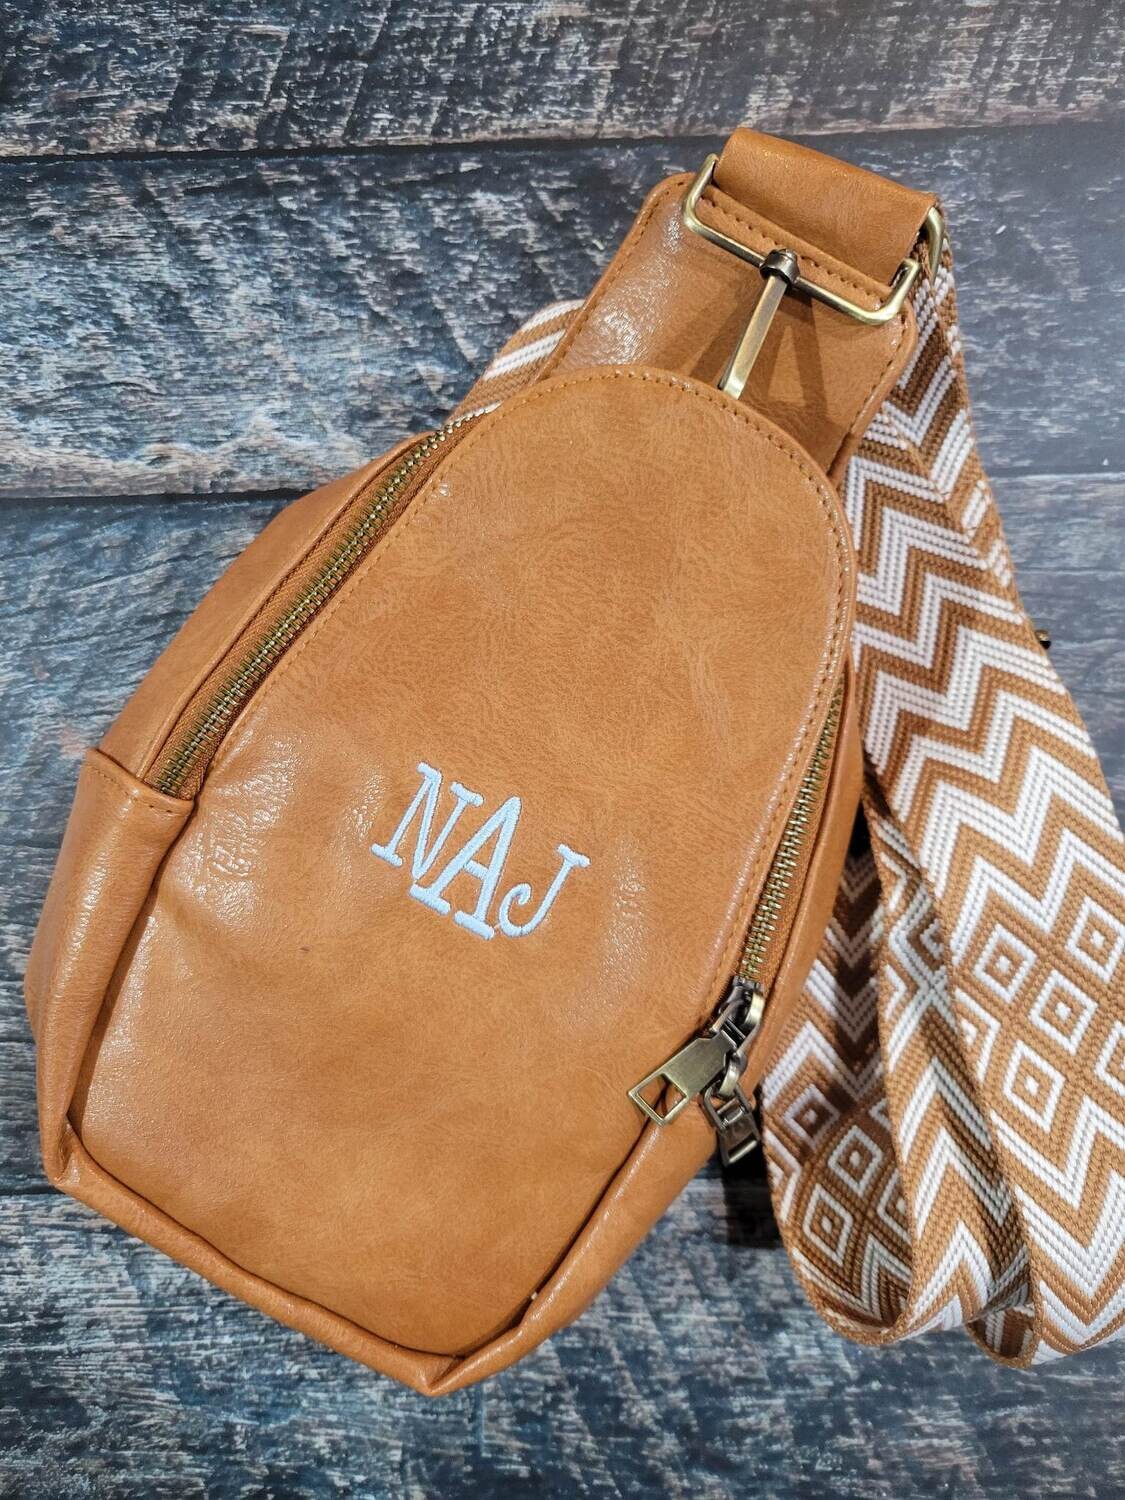 Crossbody Fanny Pack with Embroidered Monogram in Tan